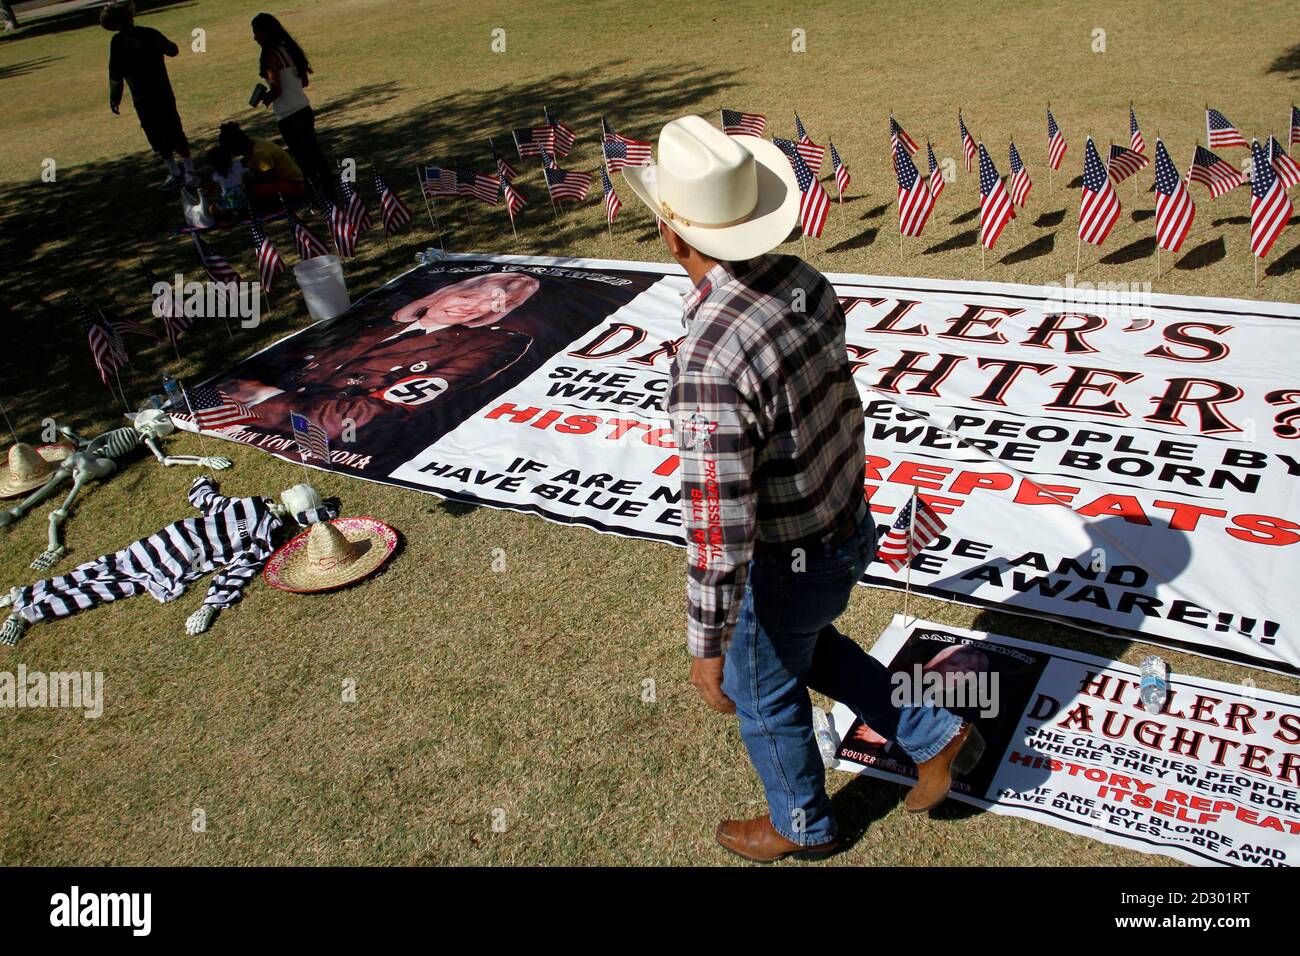 A man protesting against Senate Bill 1070 looks at a banner depicting  Arizona's Governor Jan Brewer as a Nazi outside the Arizona State Capitol  in Phoenix, Arizona April 29, 2010. Civil rights